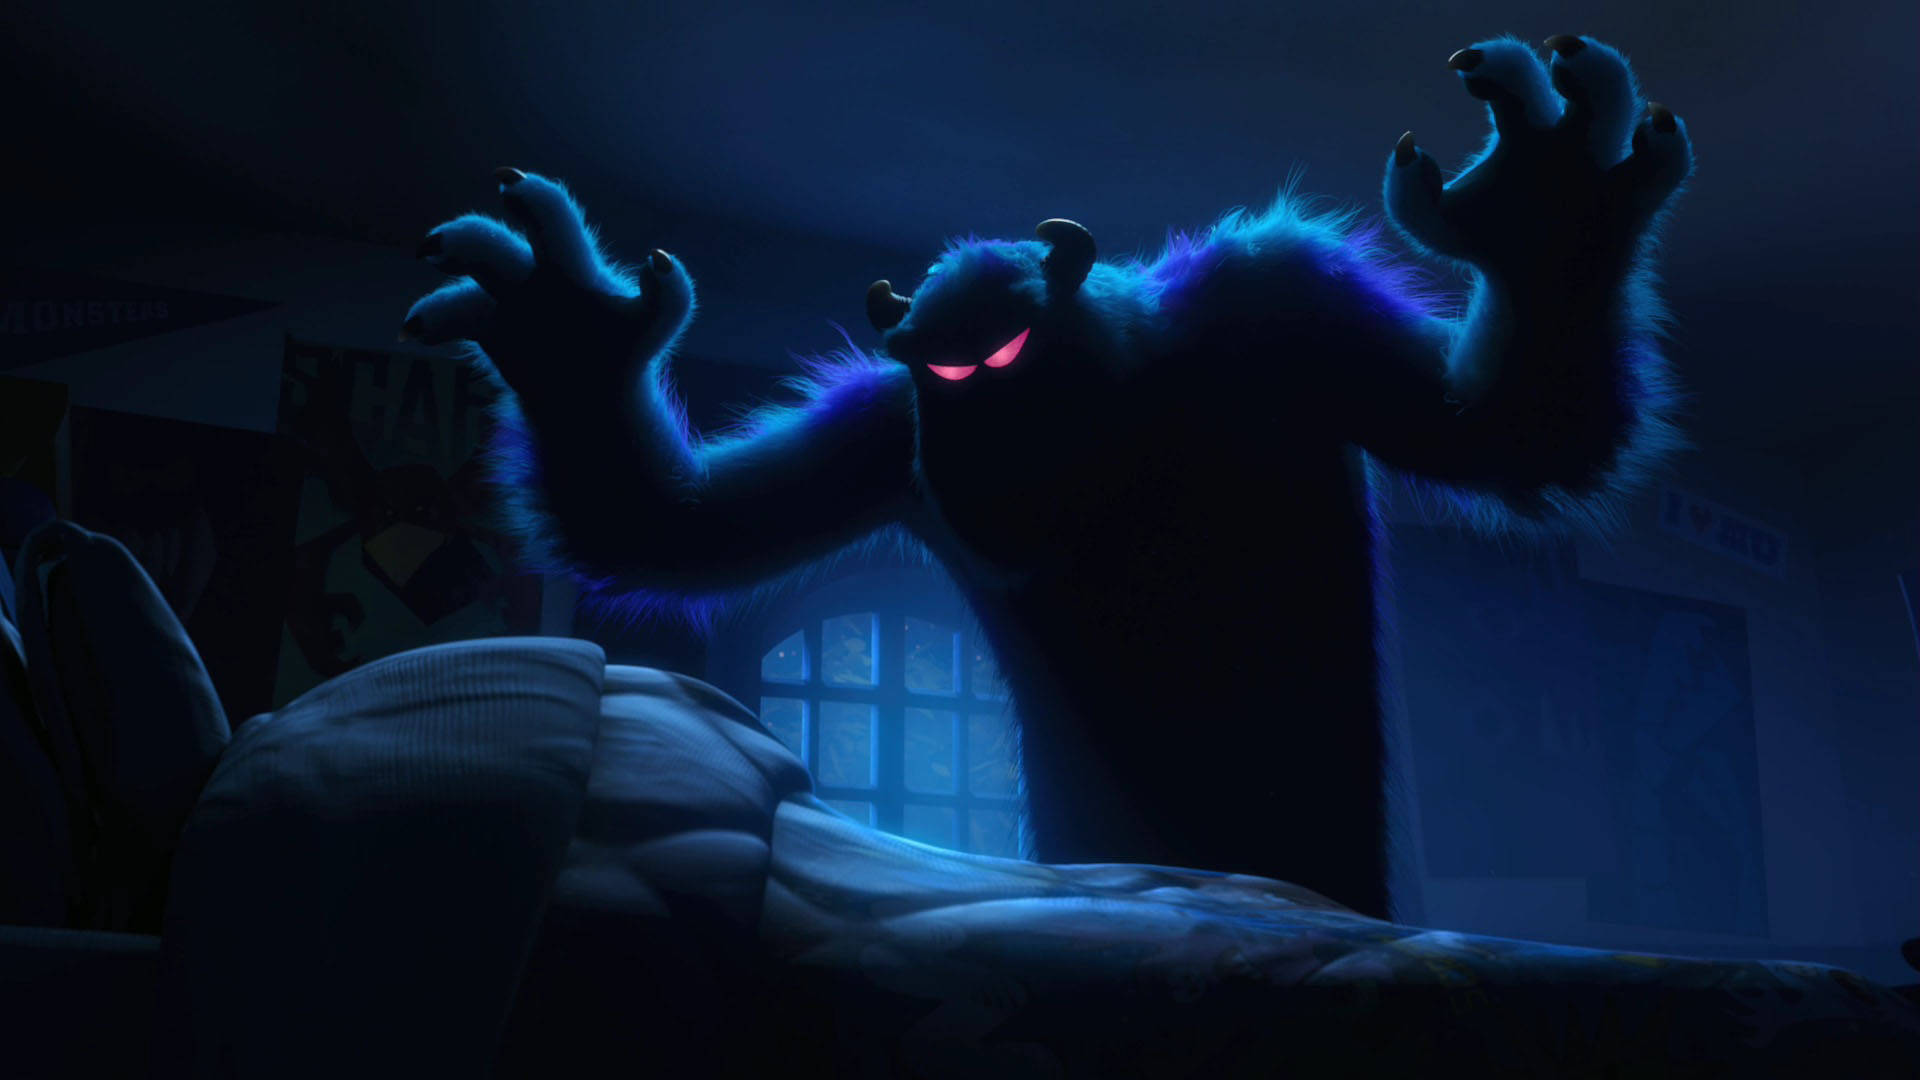 Sulley The Top Scarer Background